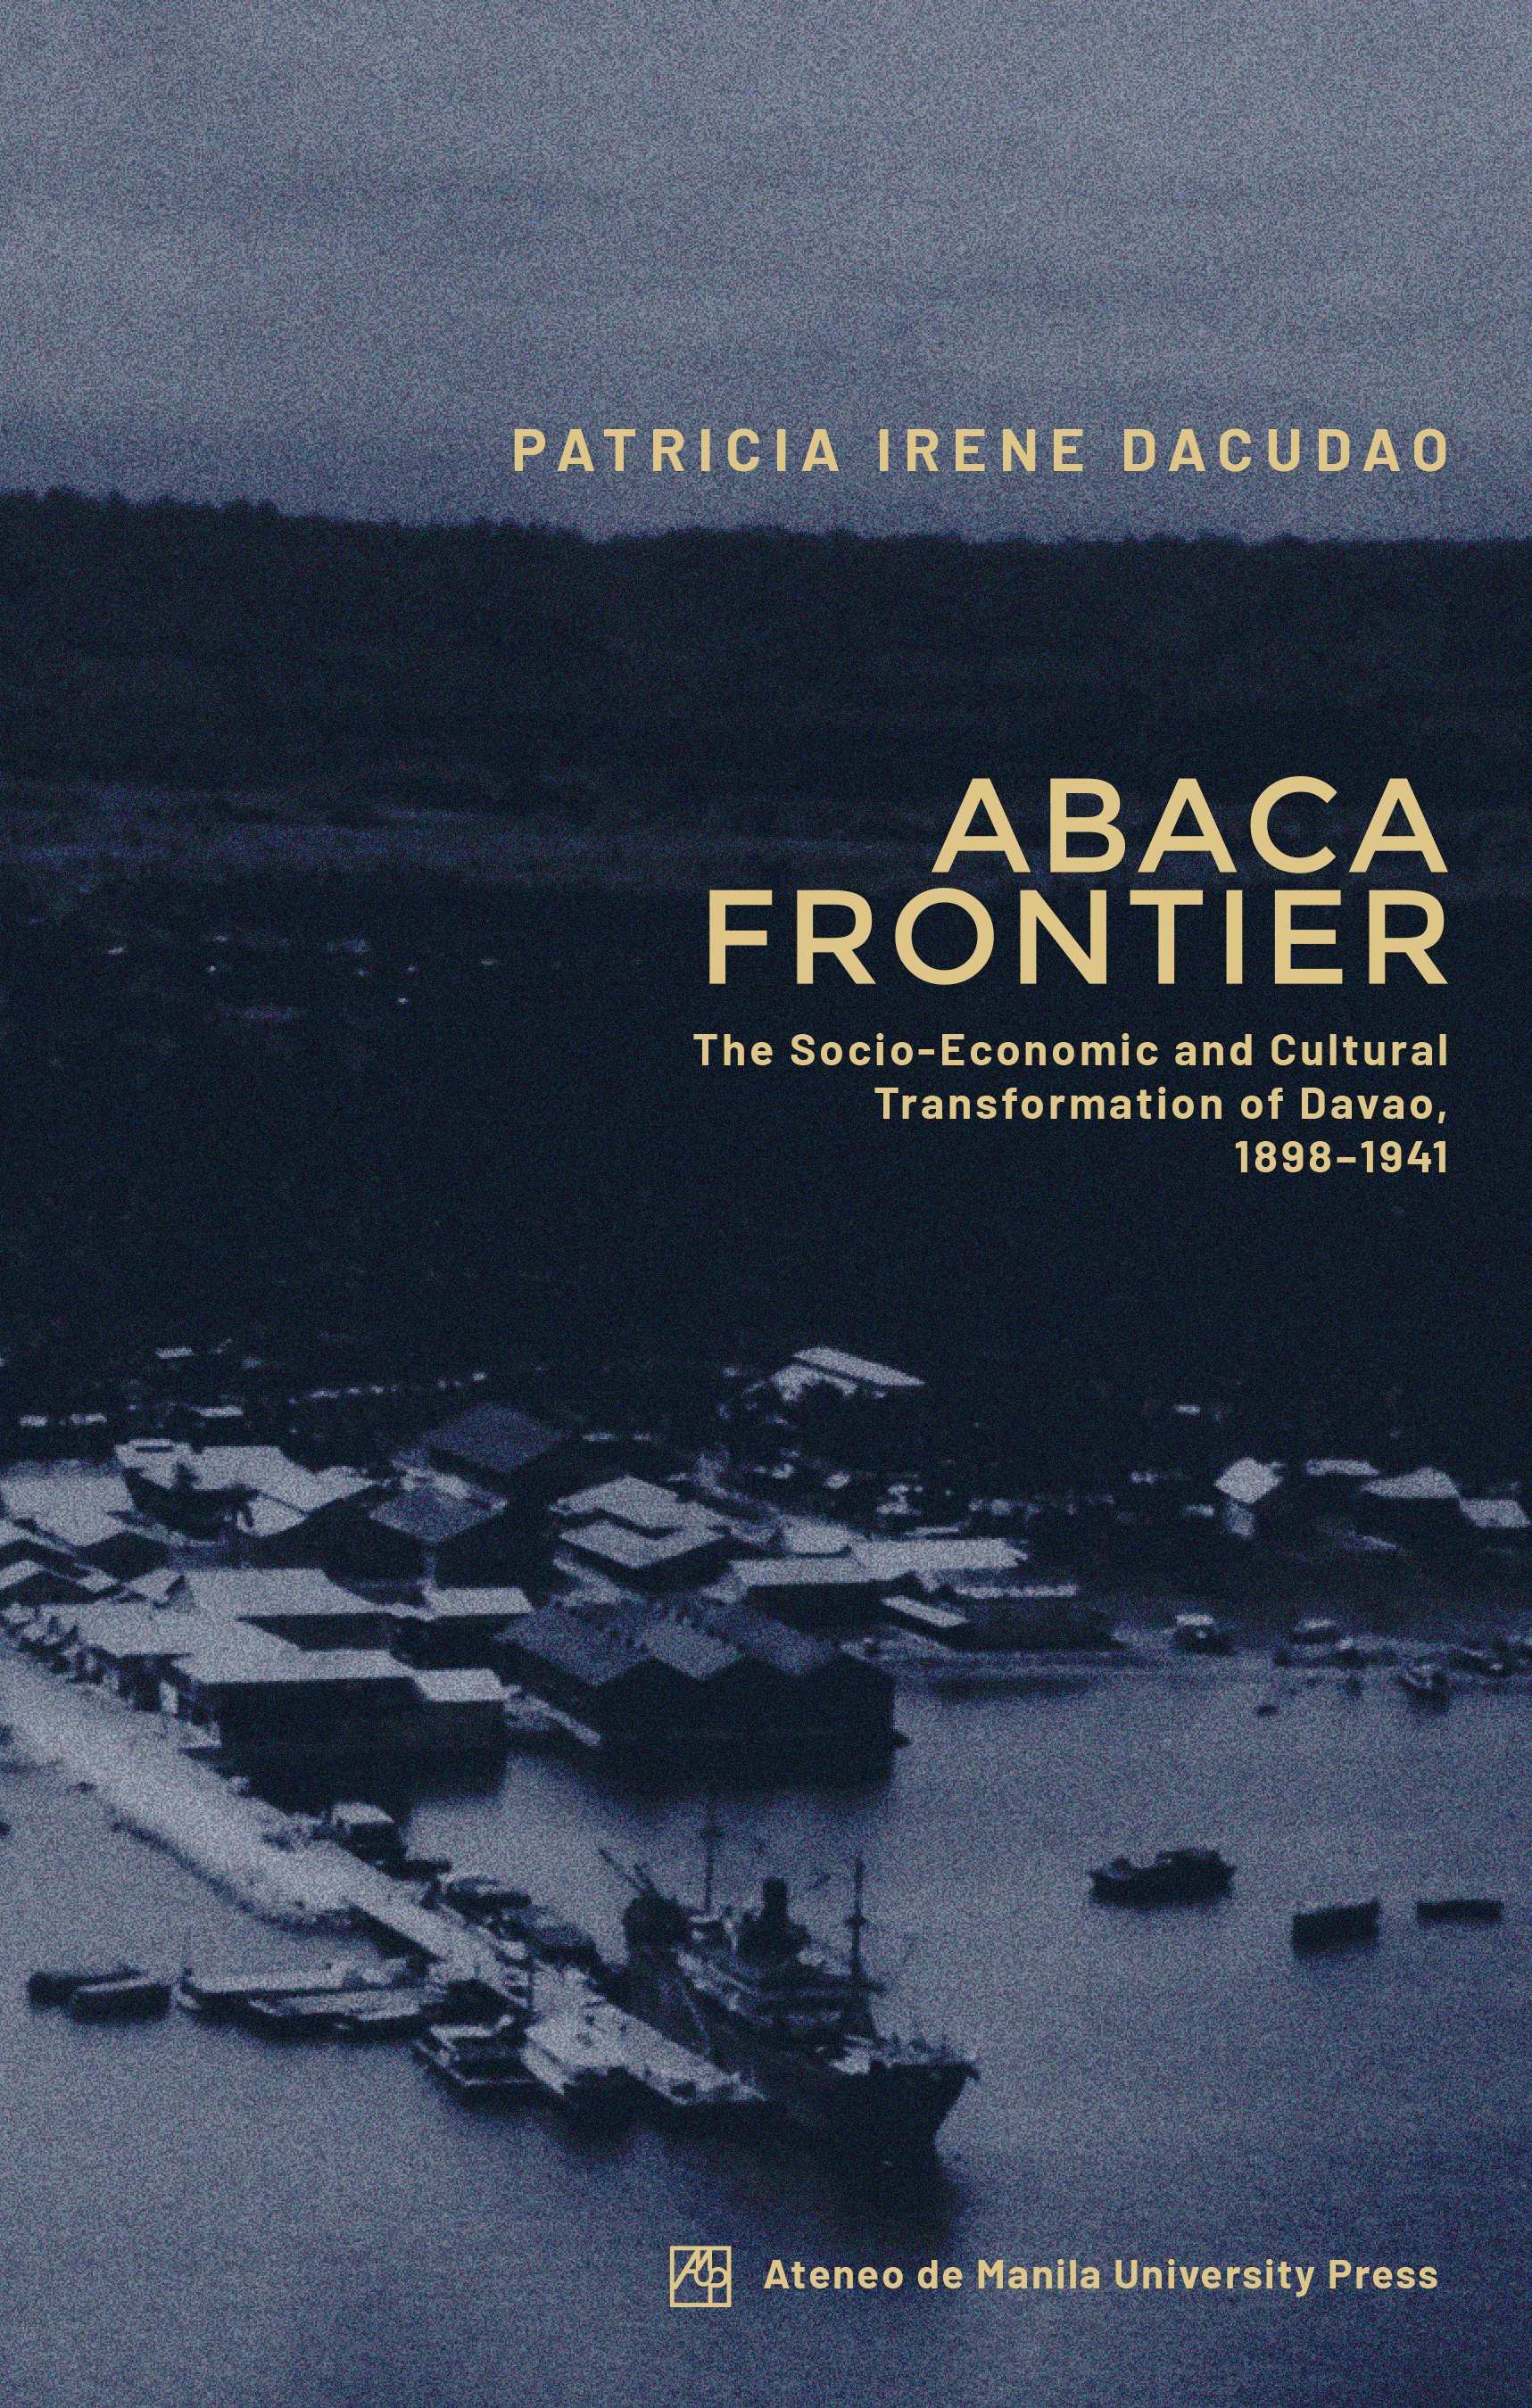 Book cover of Abaca Frontier by Patricia Irene Dacudao published by the Ateneo University Press